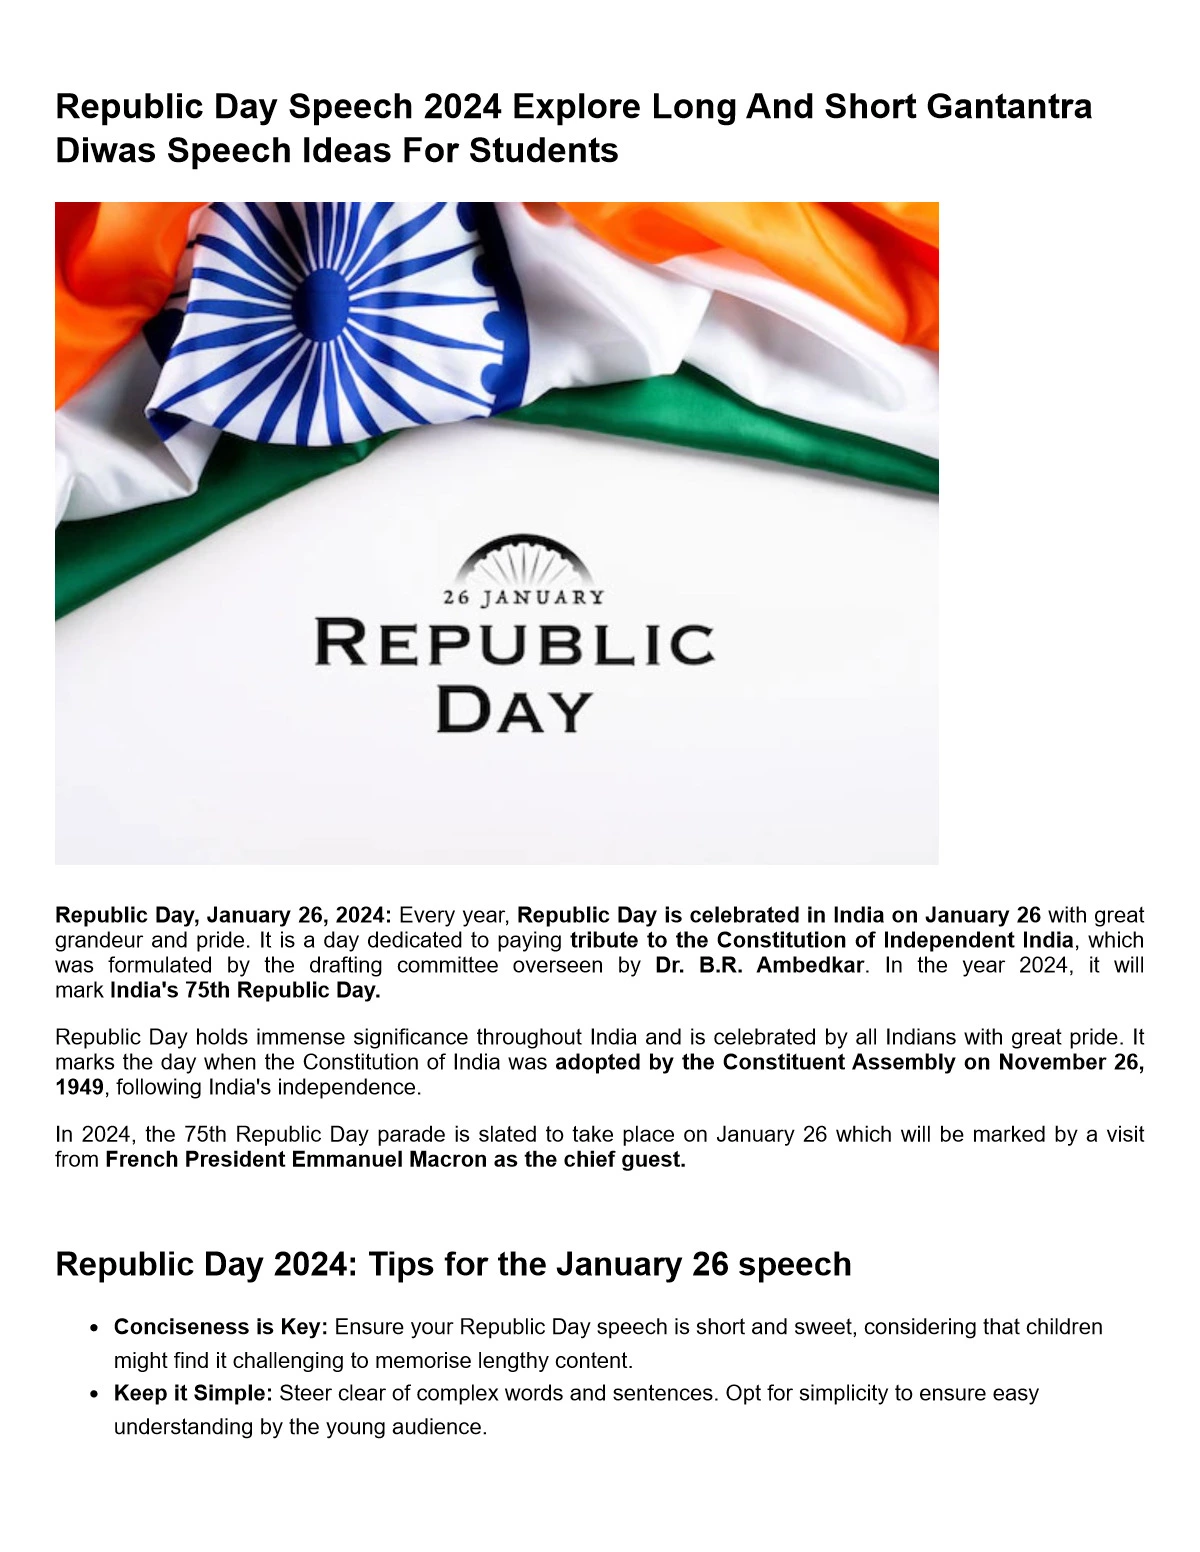 Republic Day Speech for Students